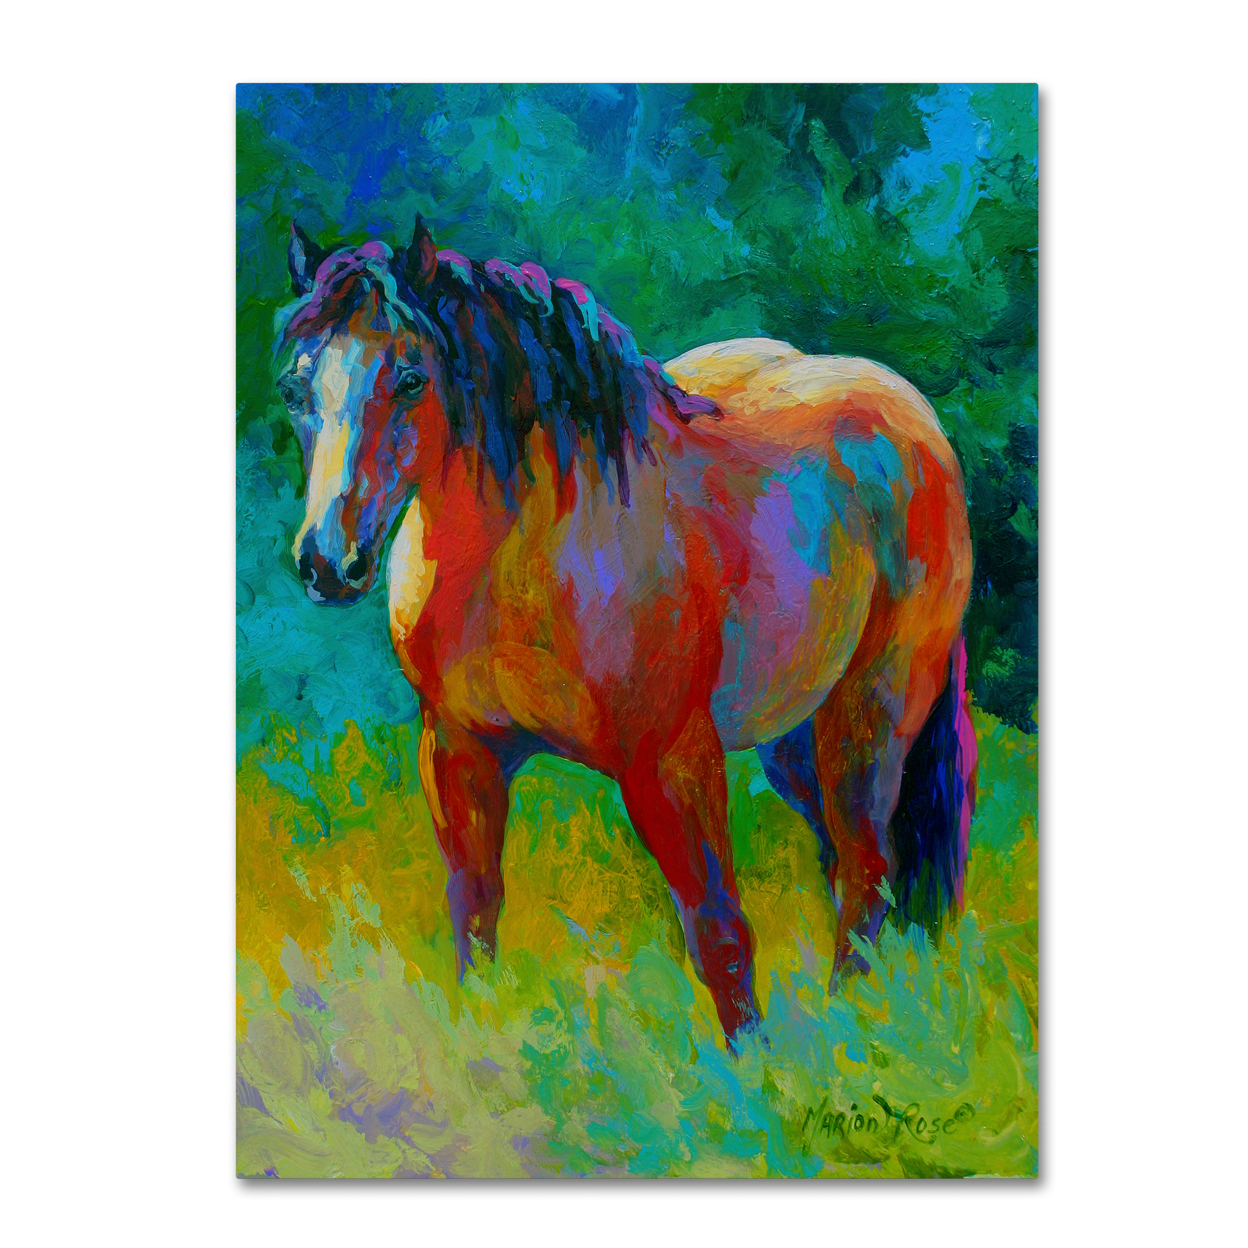 Marion Rose 'Buckskin II' Ready To Hang Canvas Art 24 X 32 Inches Made In USA